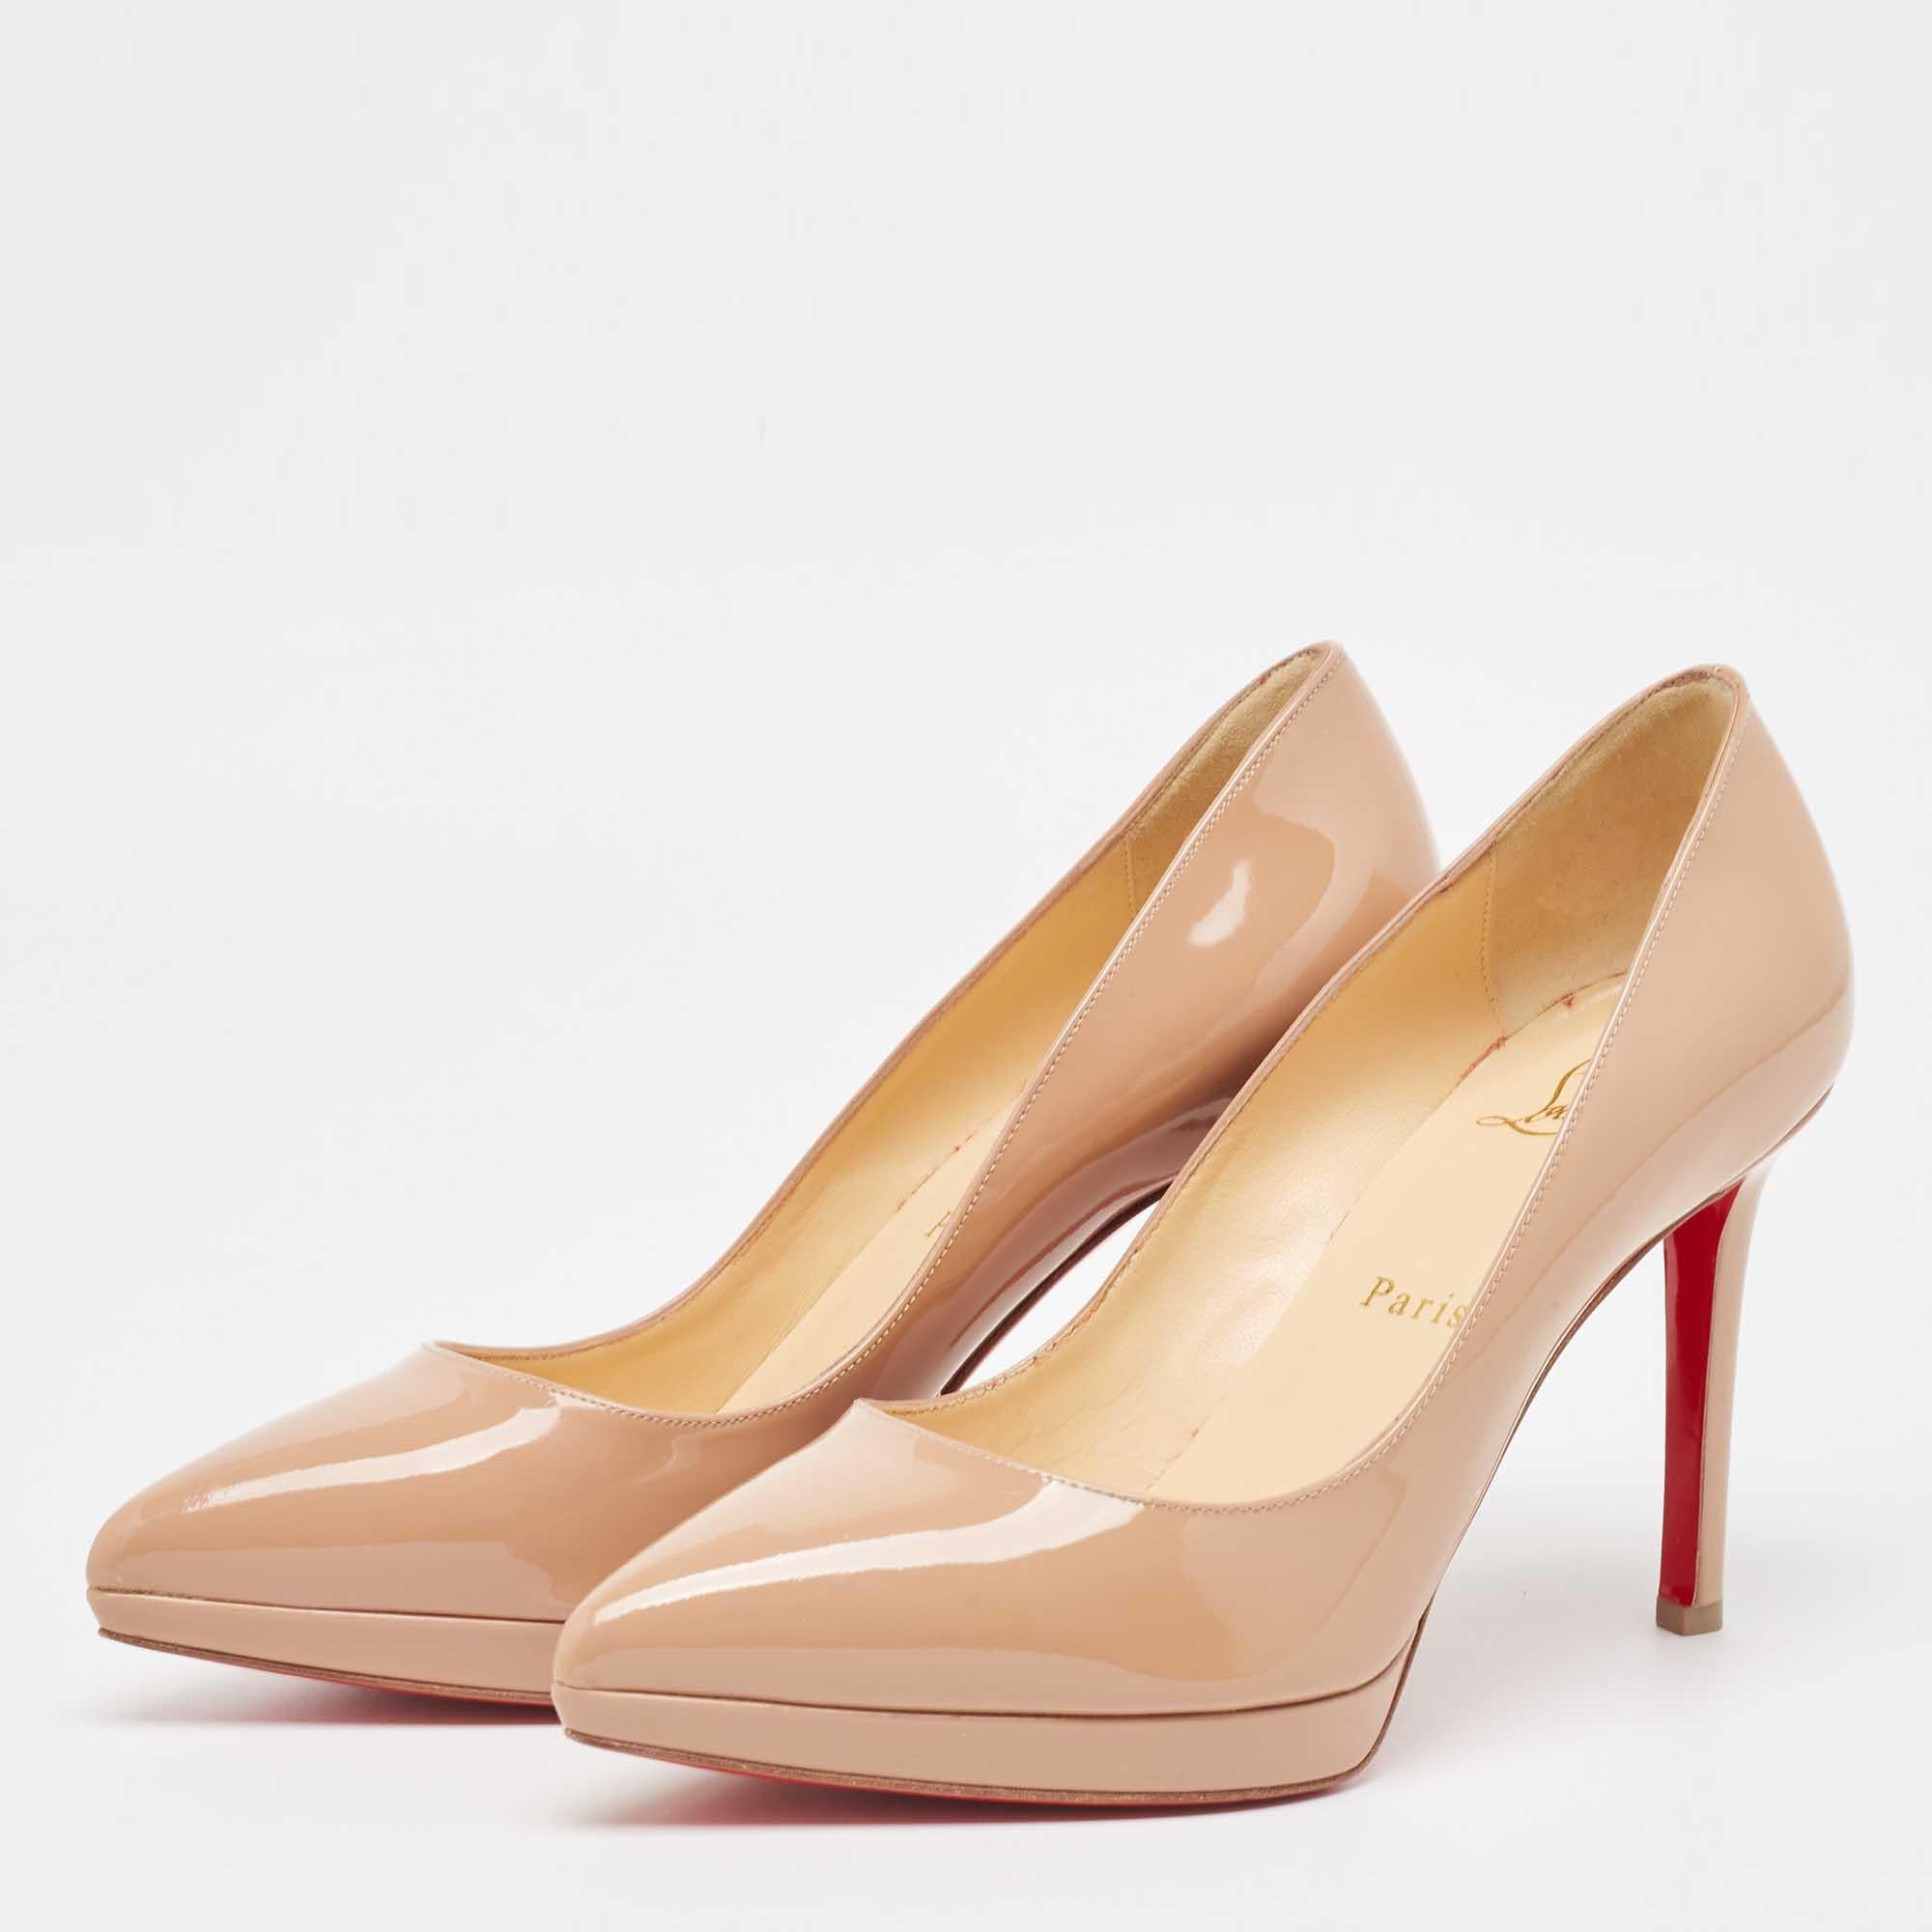 Christian Louboutin Beige Patent Leather Pigalle Plato Pumps Size 37 For Sale 5